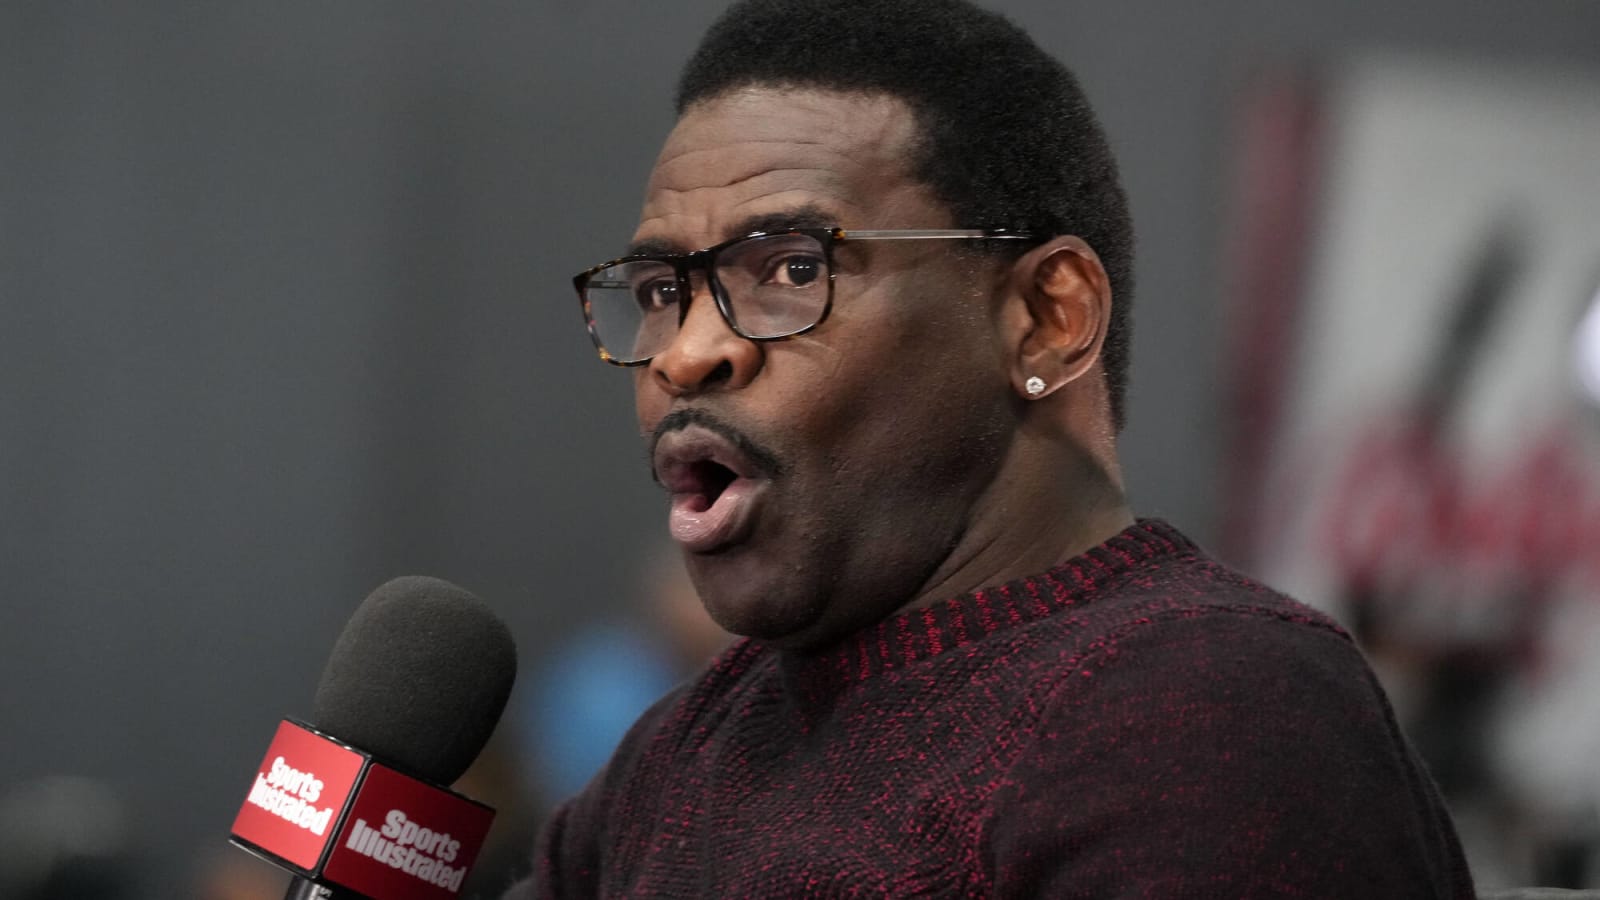 Playmaker benched: Michael Irvin pulled off-air, files $100M lawsuit